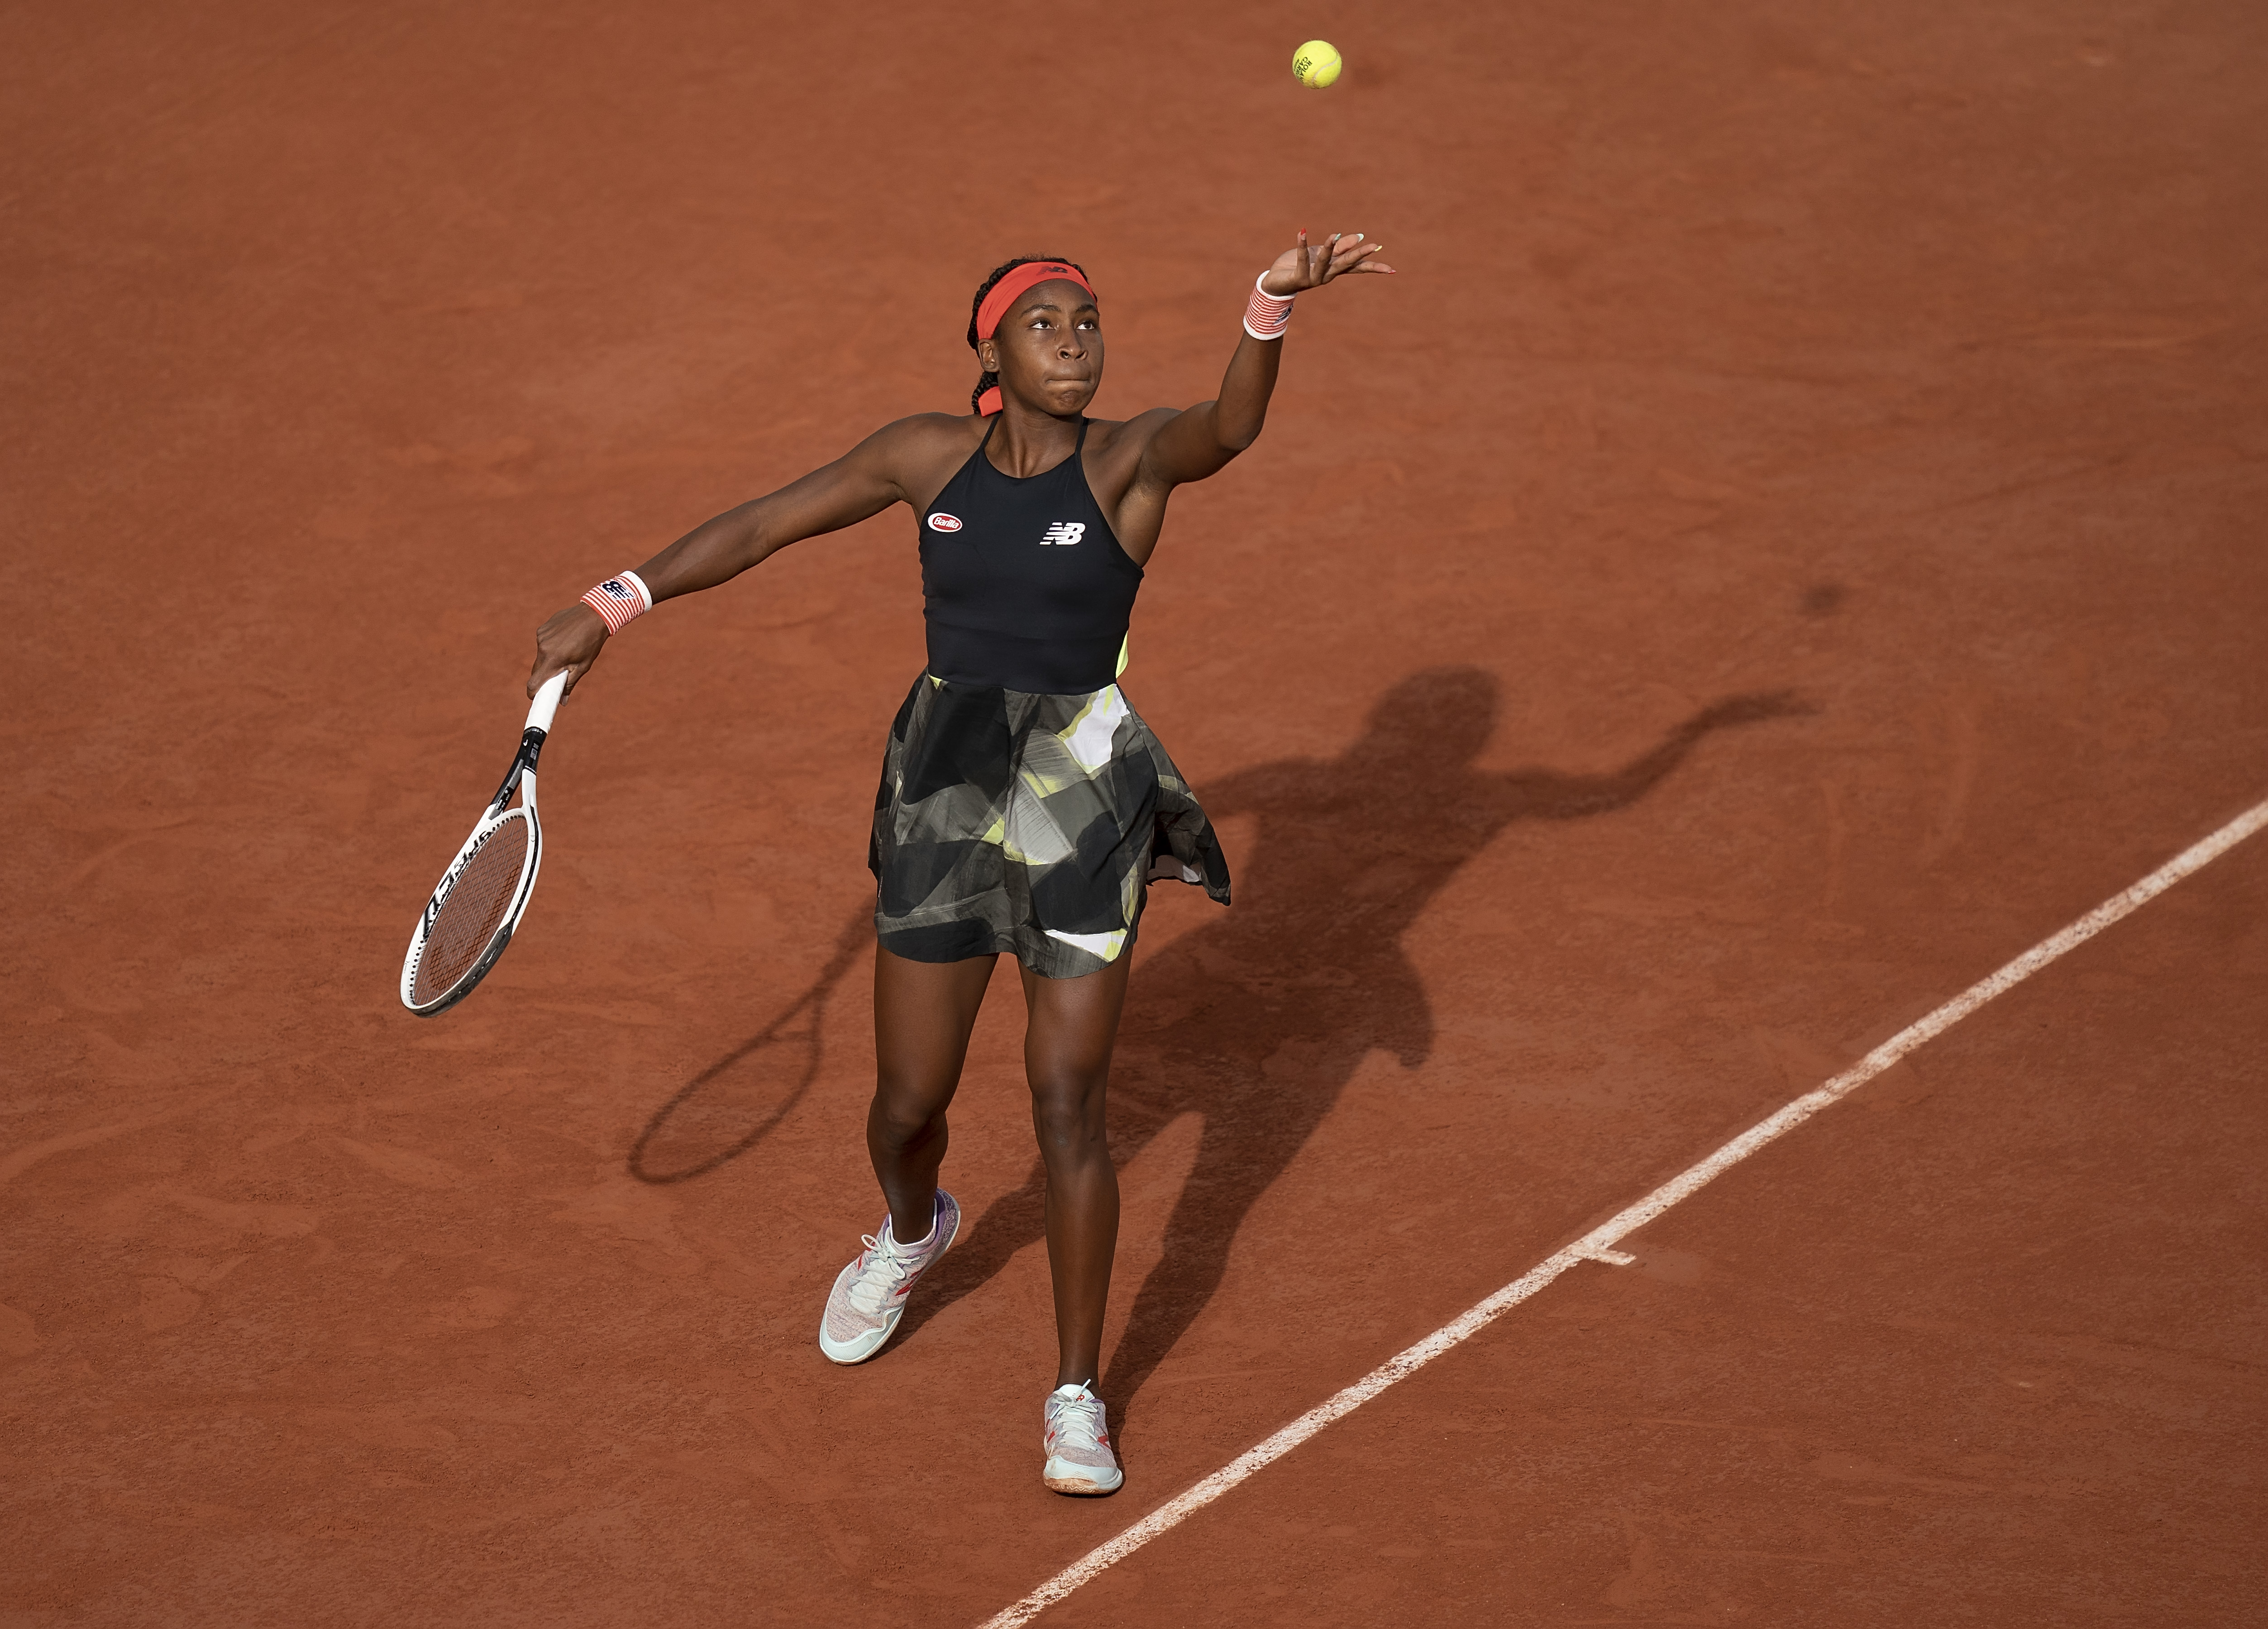 Gauff on a roll, but keeping her guard up Reuters